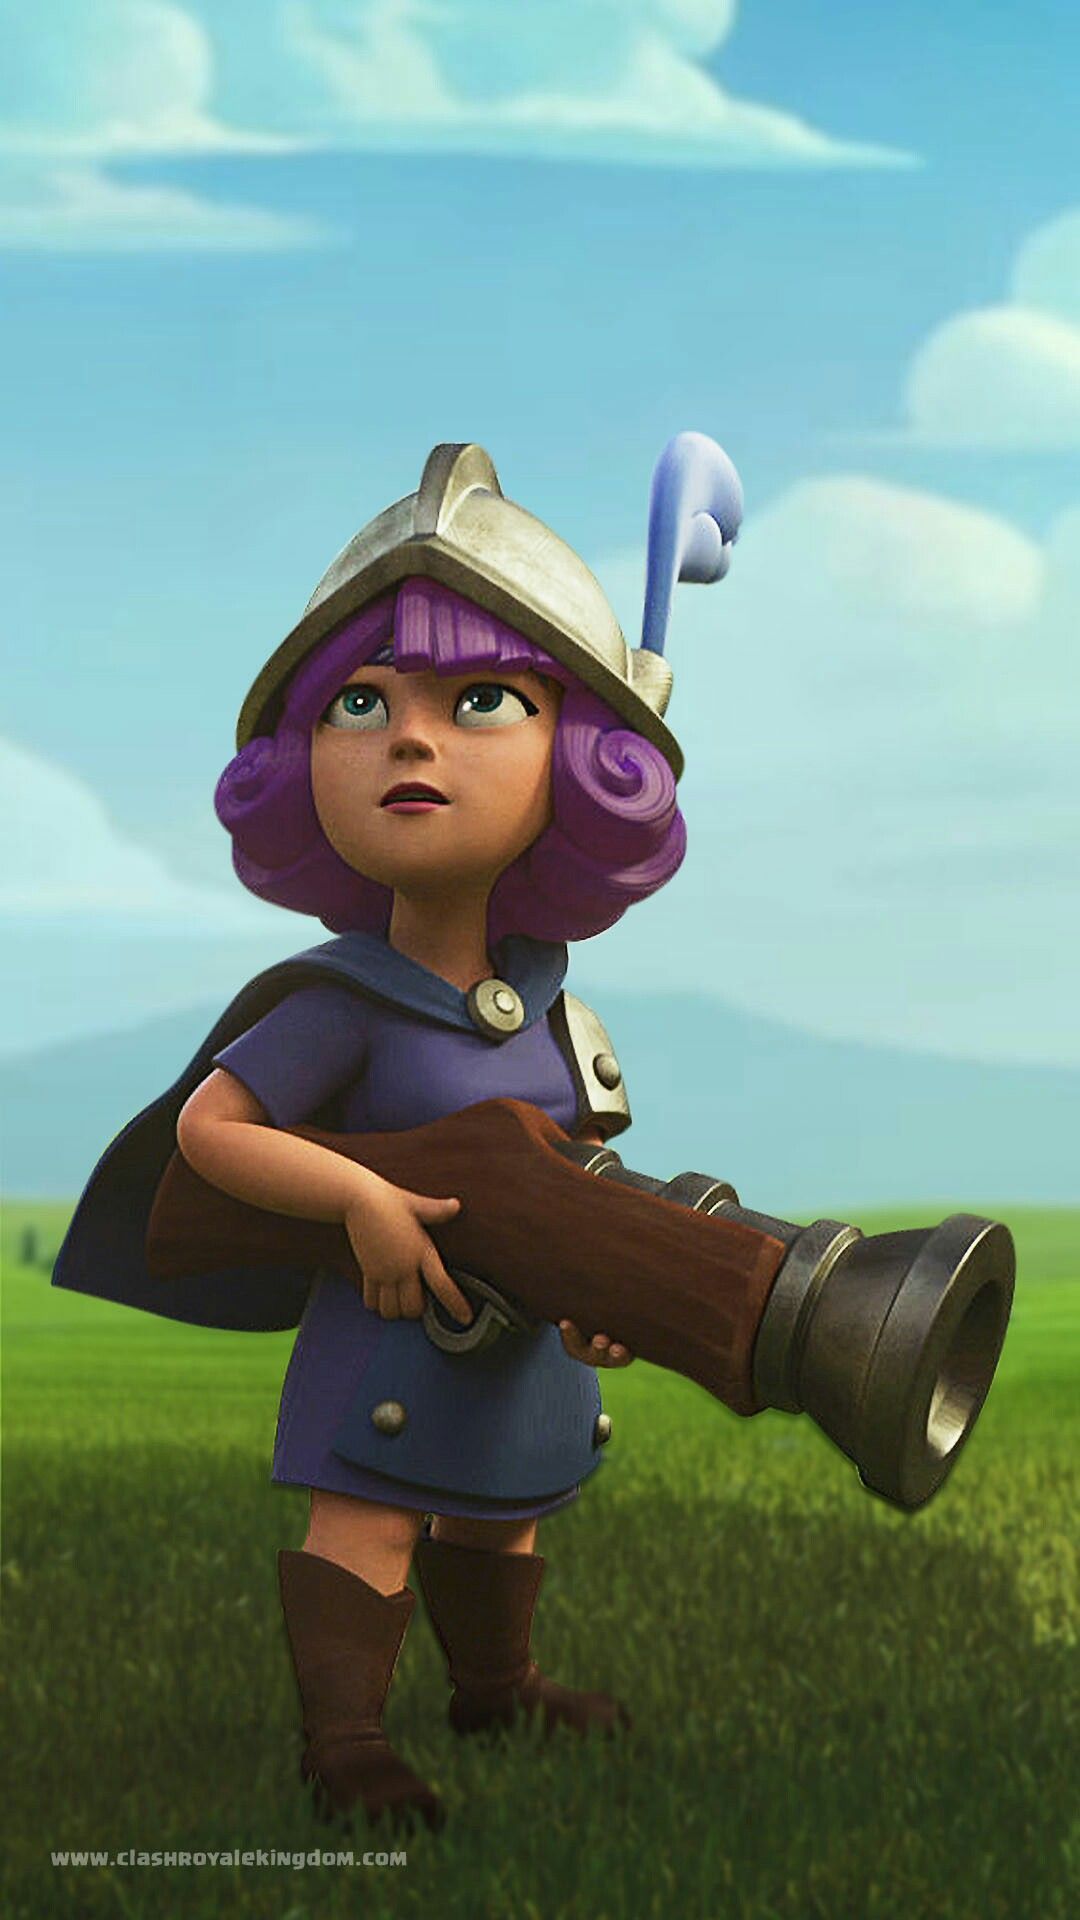 Pretty Musketeer. Clash royale wallpaper, Clash royale, Clash royale party